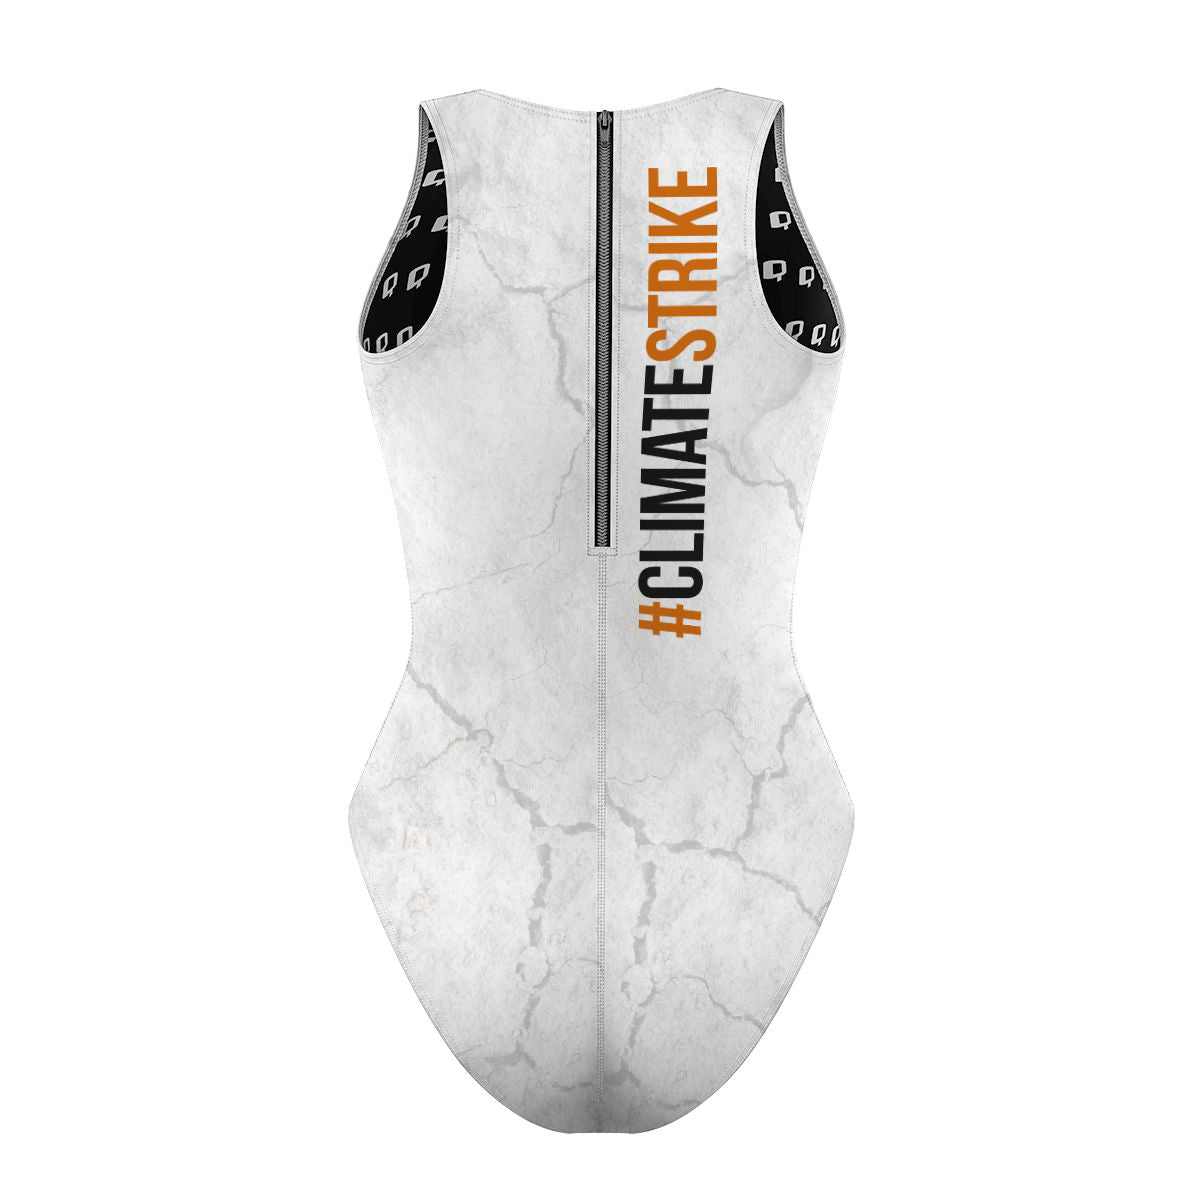 Climate Strike_White - Women Waterpolo Swimsuit Classic Cut